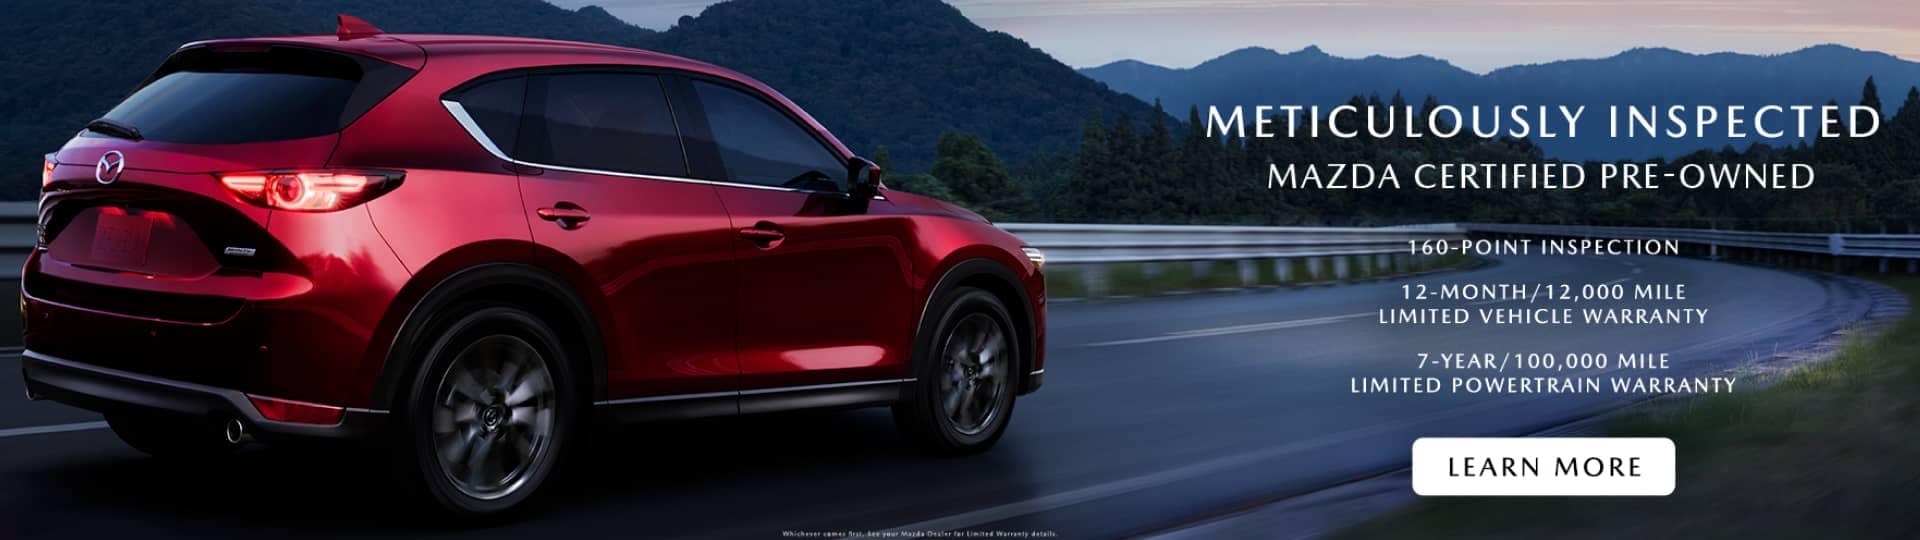 Learn More About Mazda Certified Pre-Owned